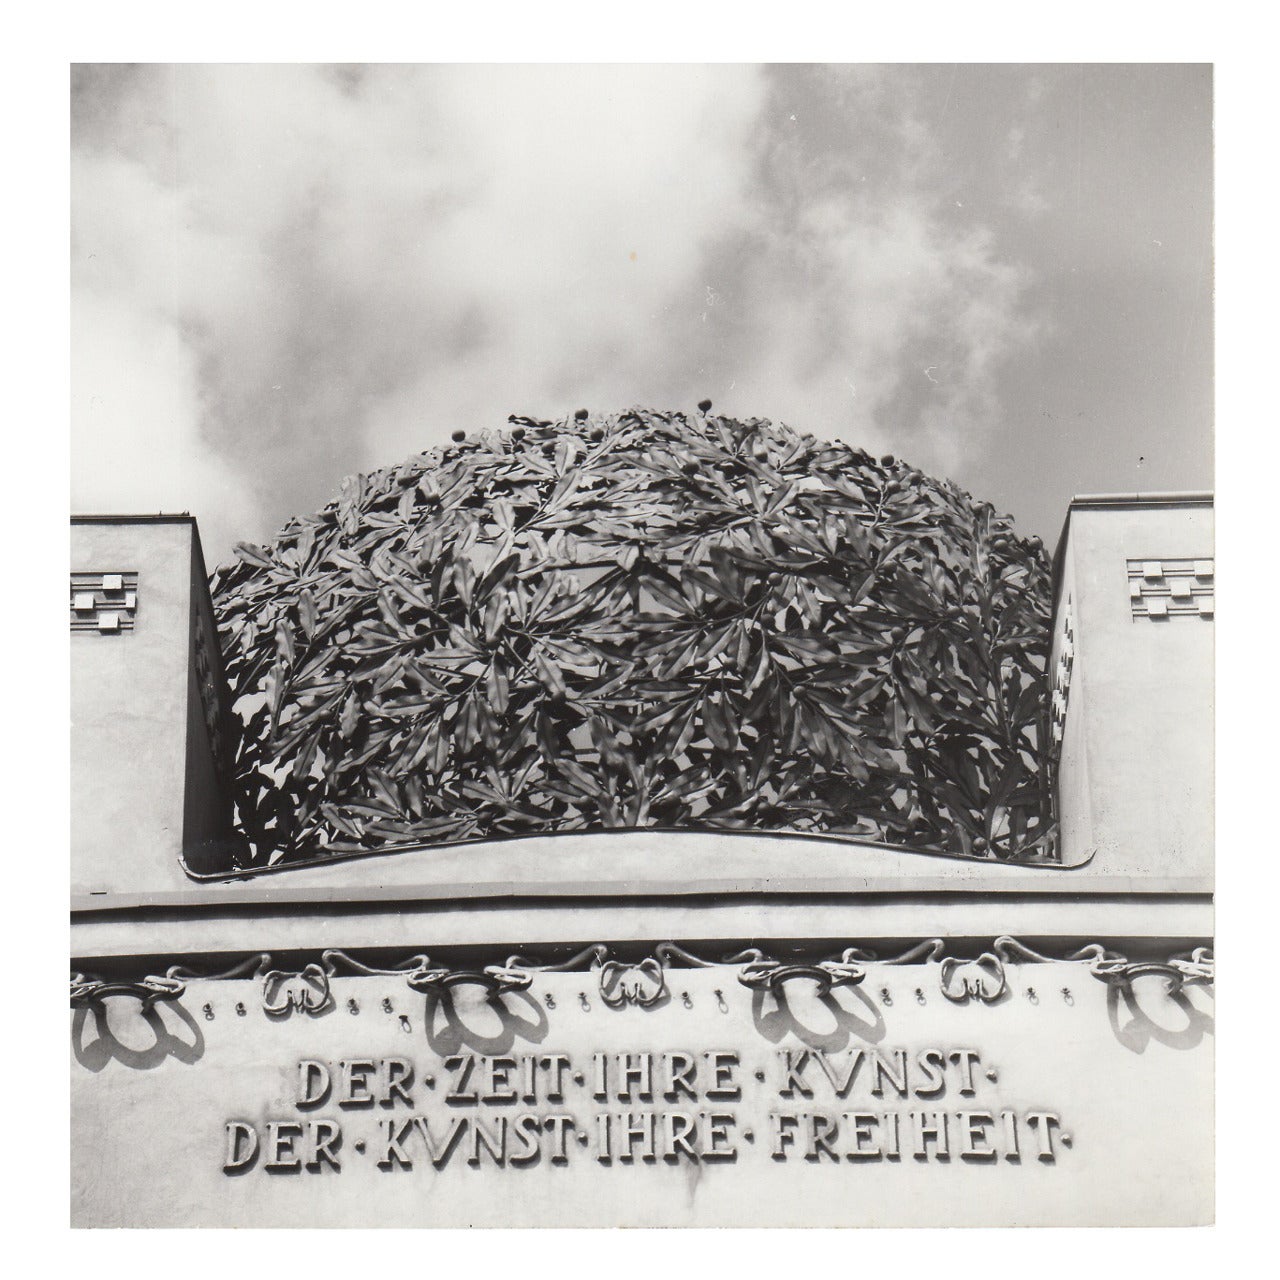 Lucca Chmel Photograph, Leaf Dome of the Secession with Slogan, Vienna For Sale